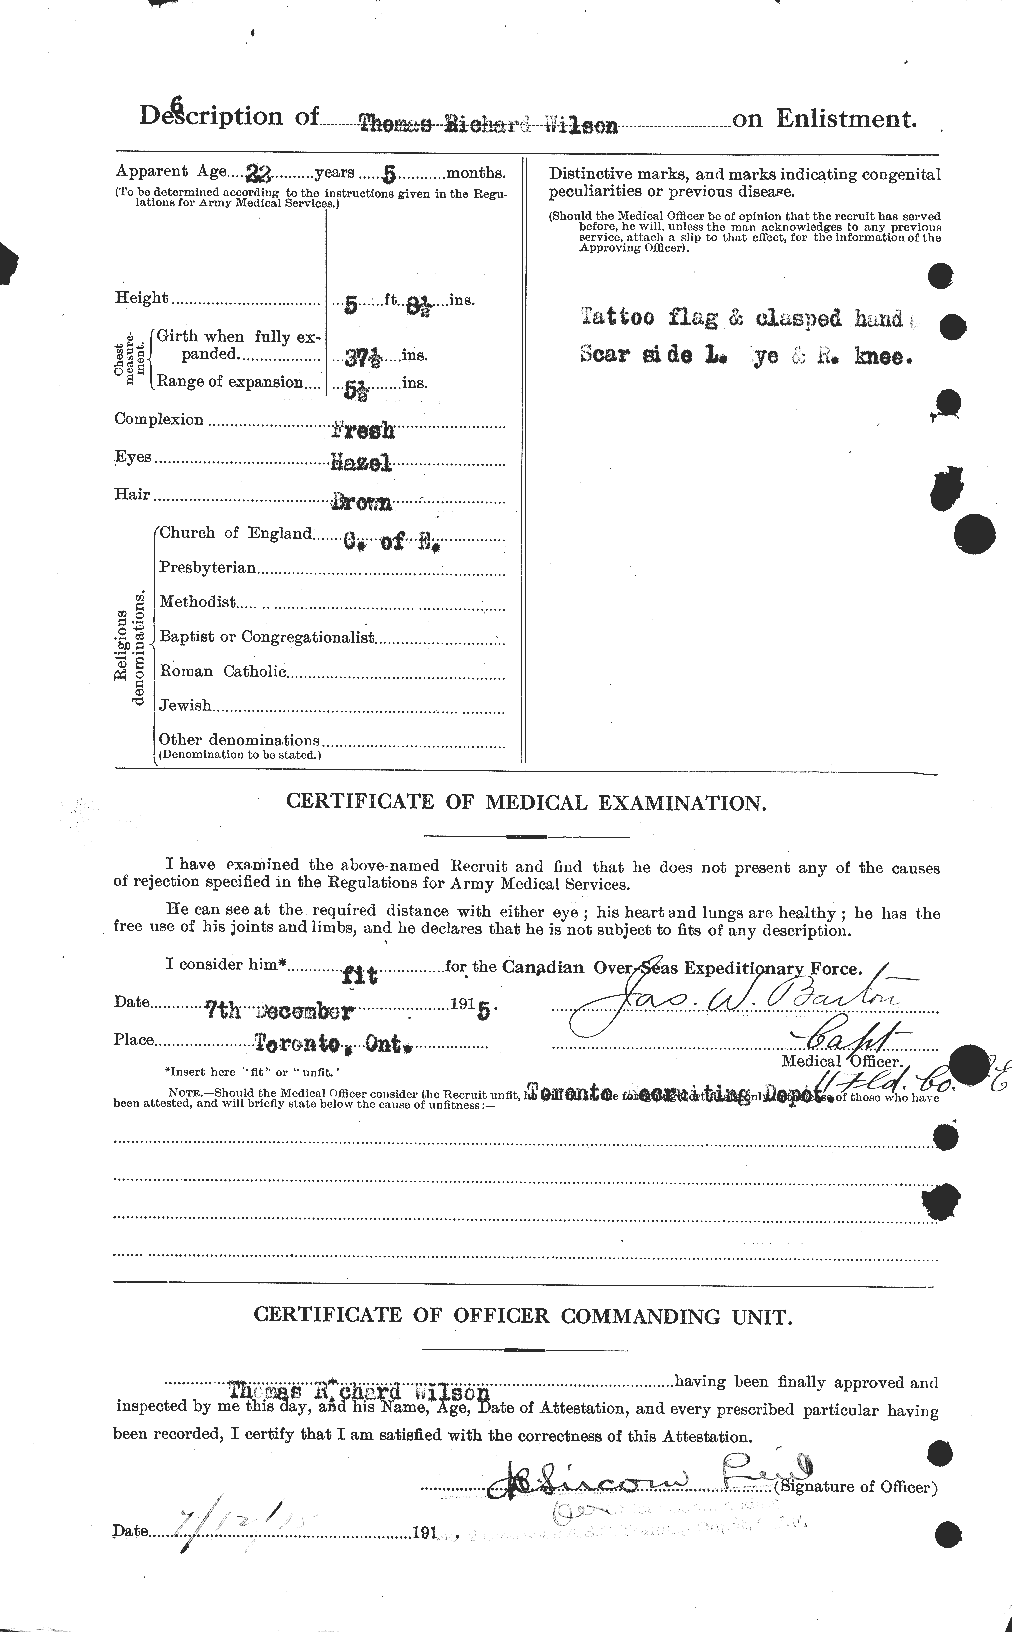 Personnel Records of the First World War - CEF 681292b